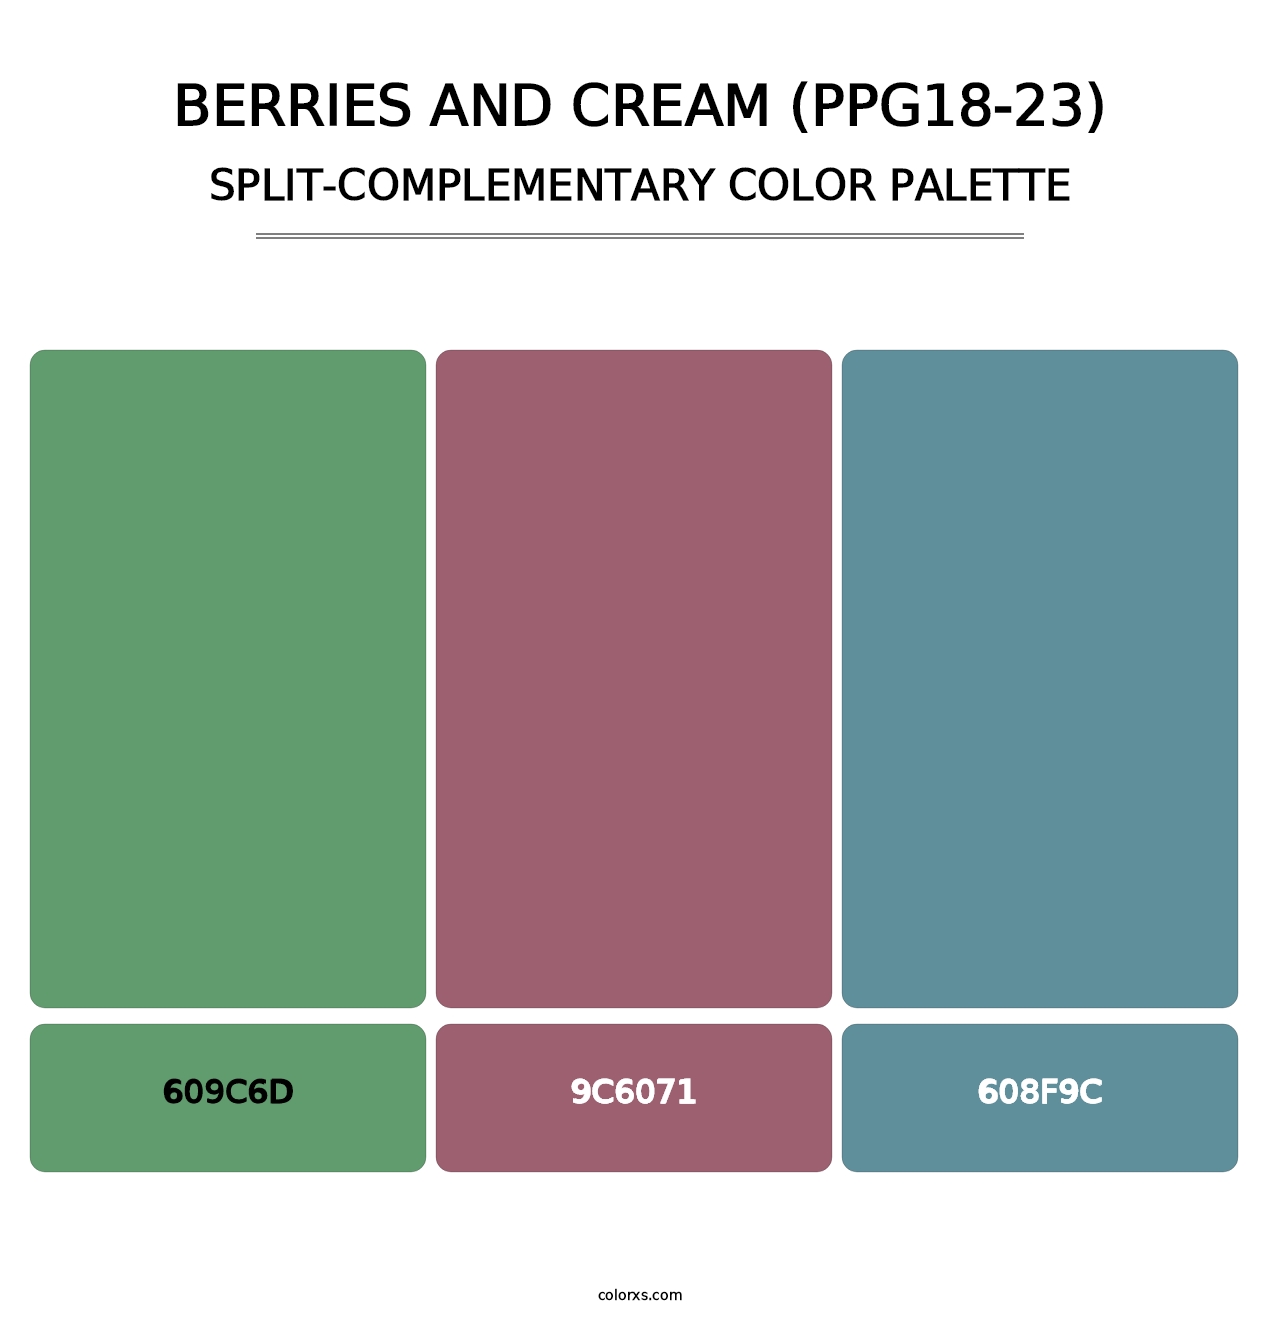 Berries And Cream (PPG18-23) - Split-Complementary Color Palette